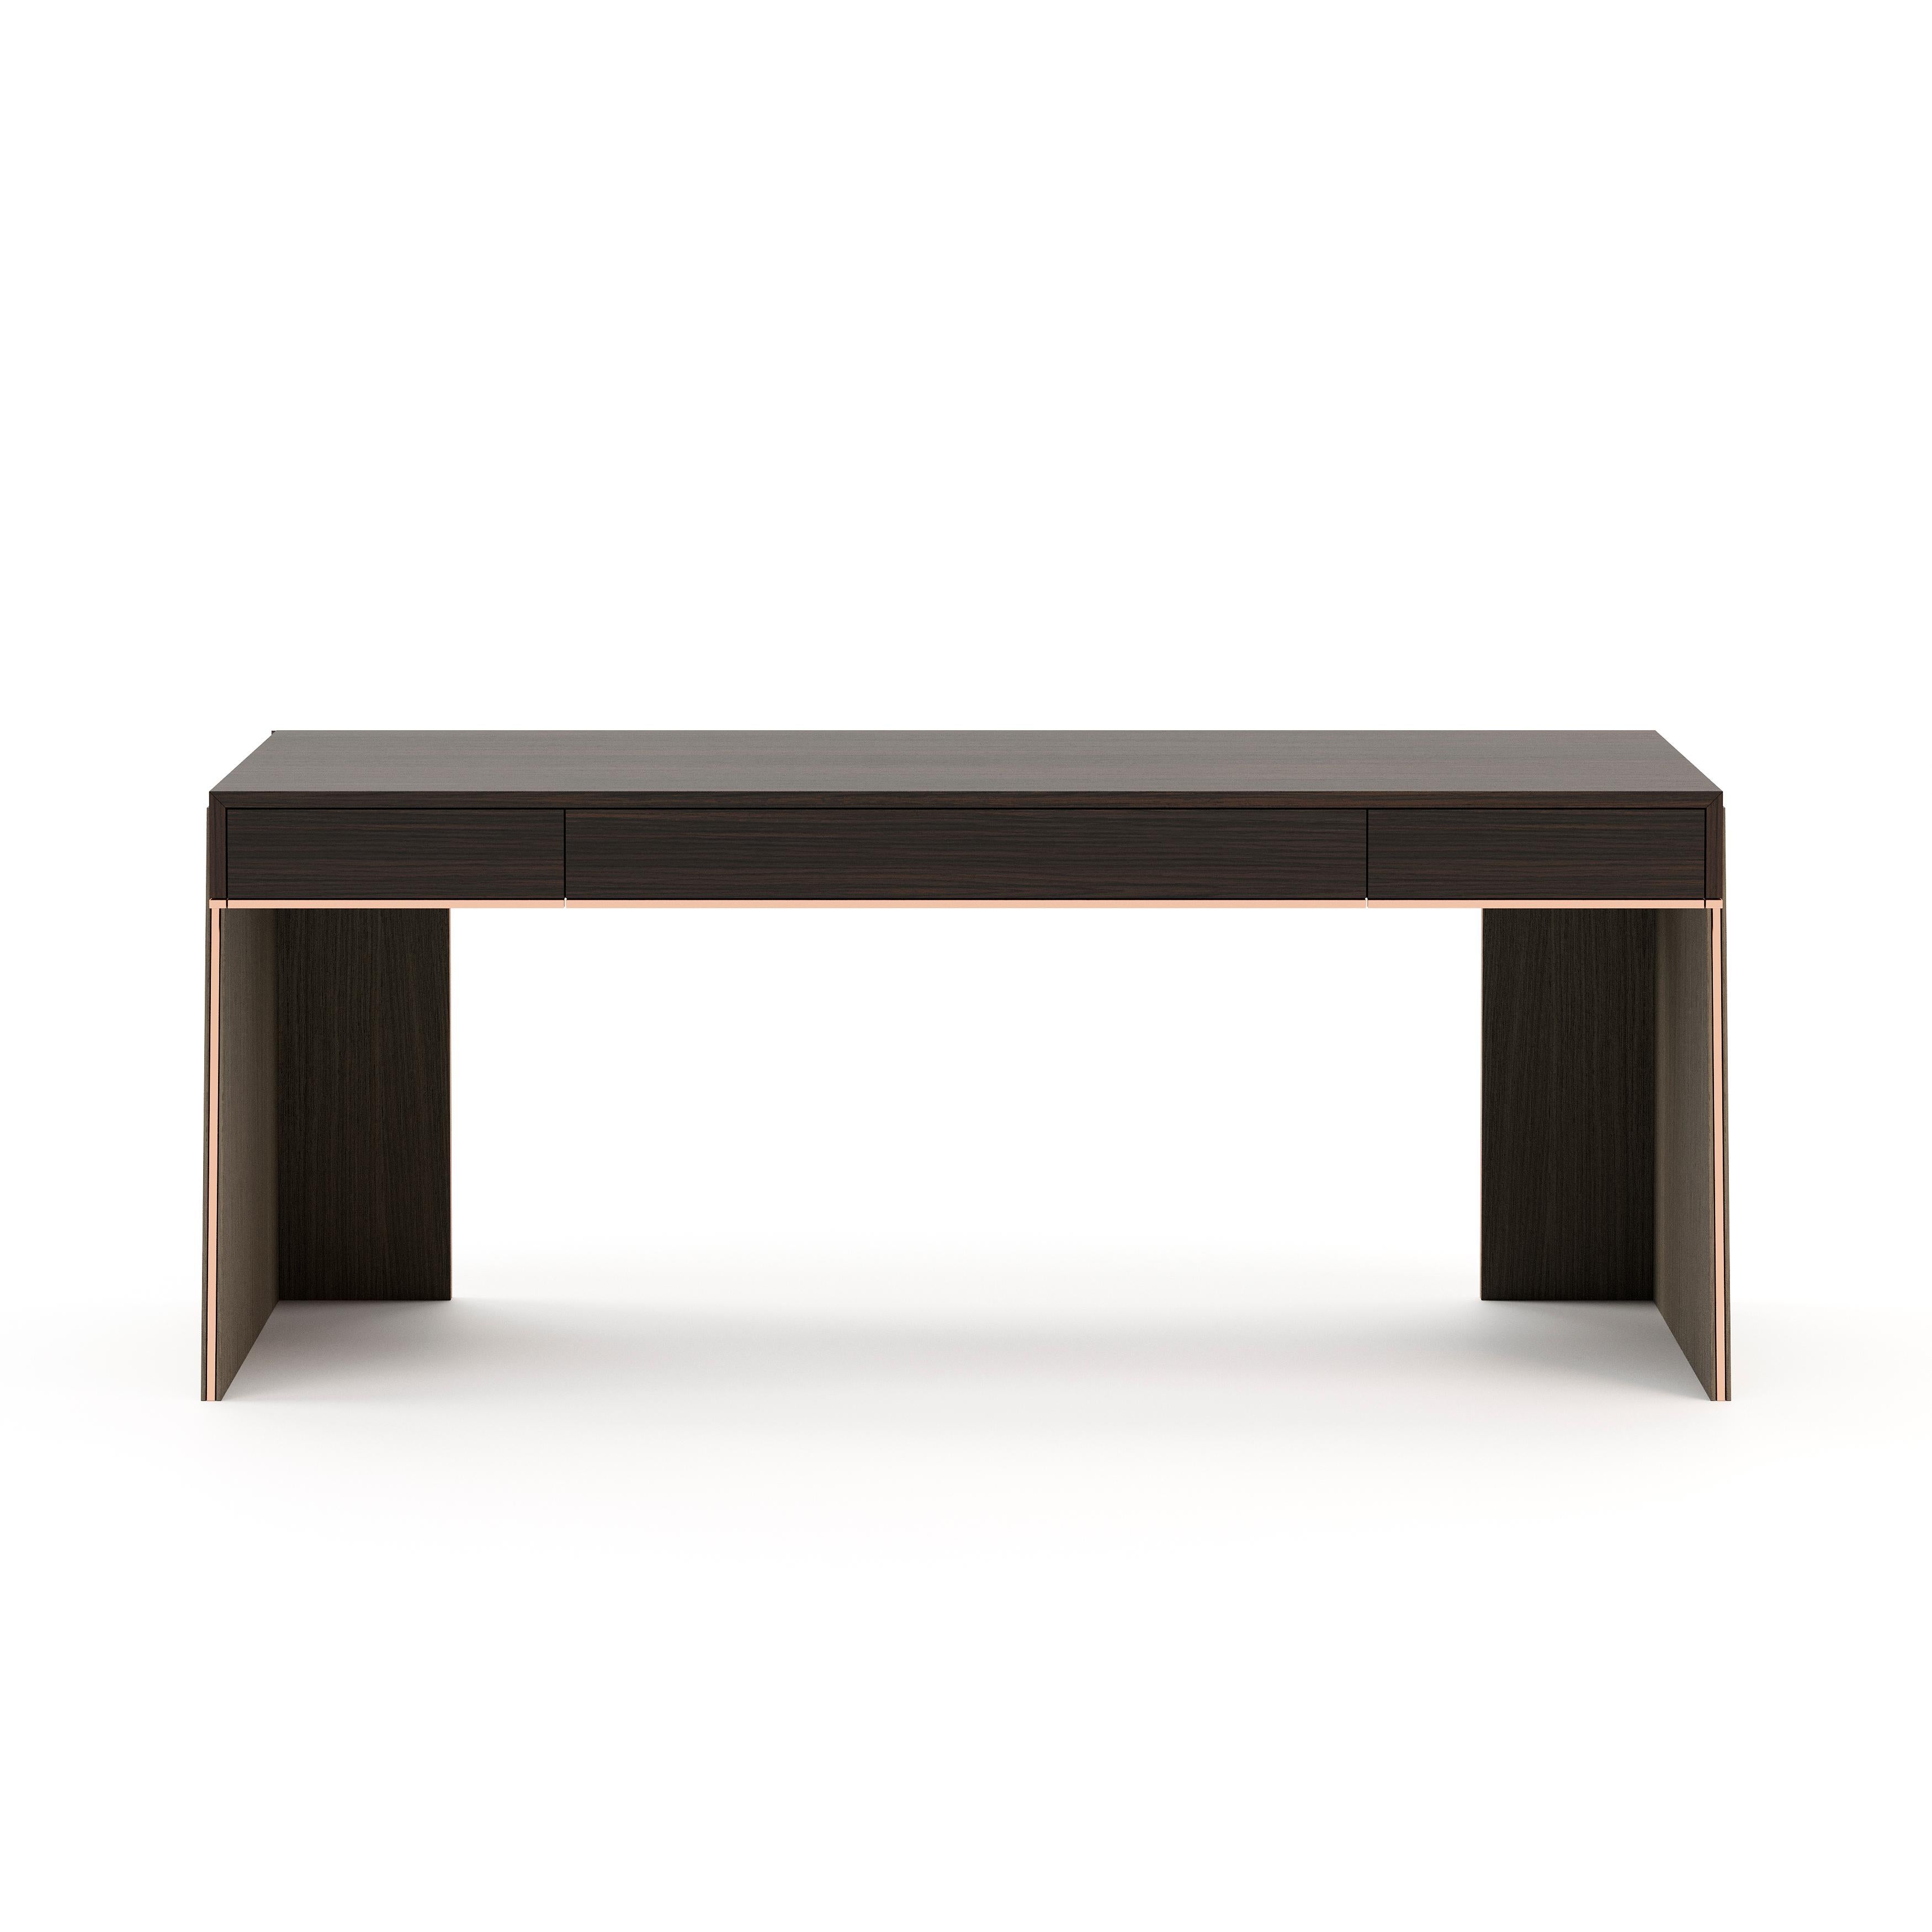 Dara desk holds sleek lines and a clean silhouette to focus on work. A wooden writing desk is perfect for any office or workspace. Dara Desk gives a minimalist feel to any room with the luxurious touch of noble materials.

* Available in different